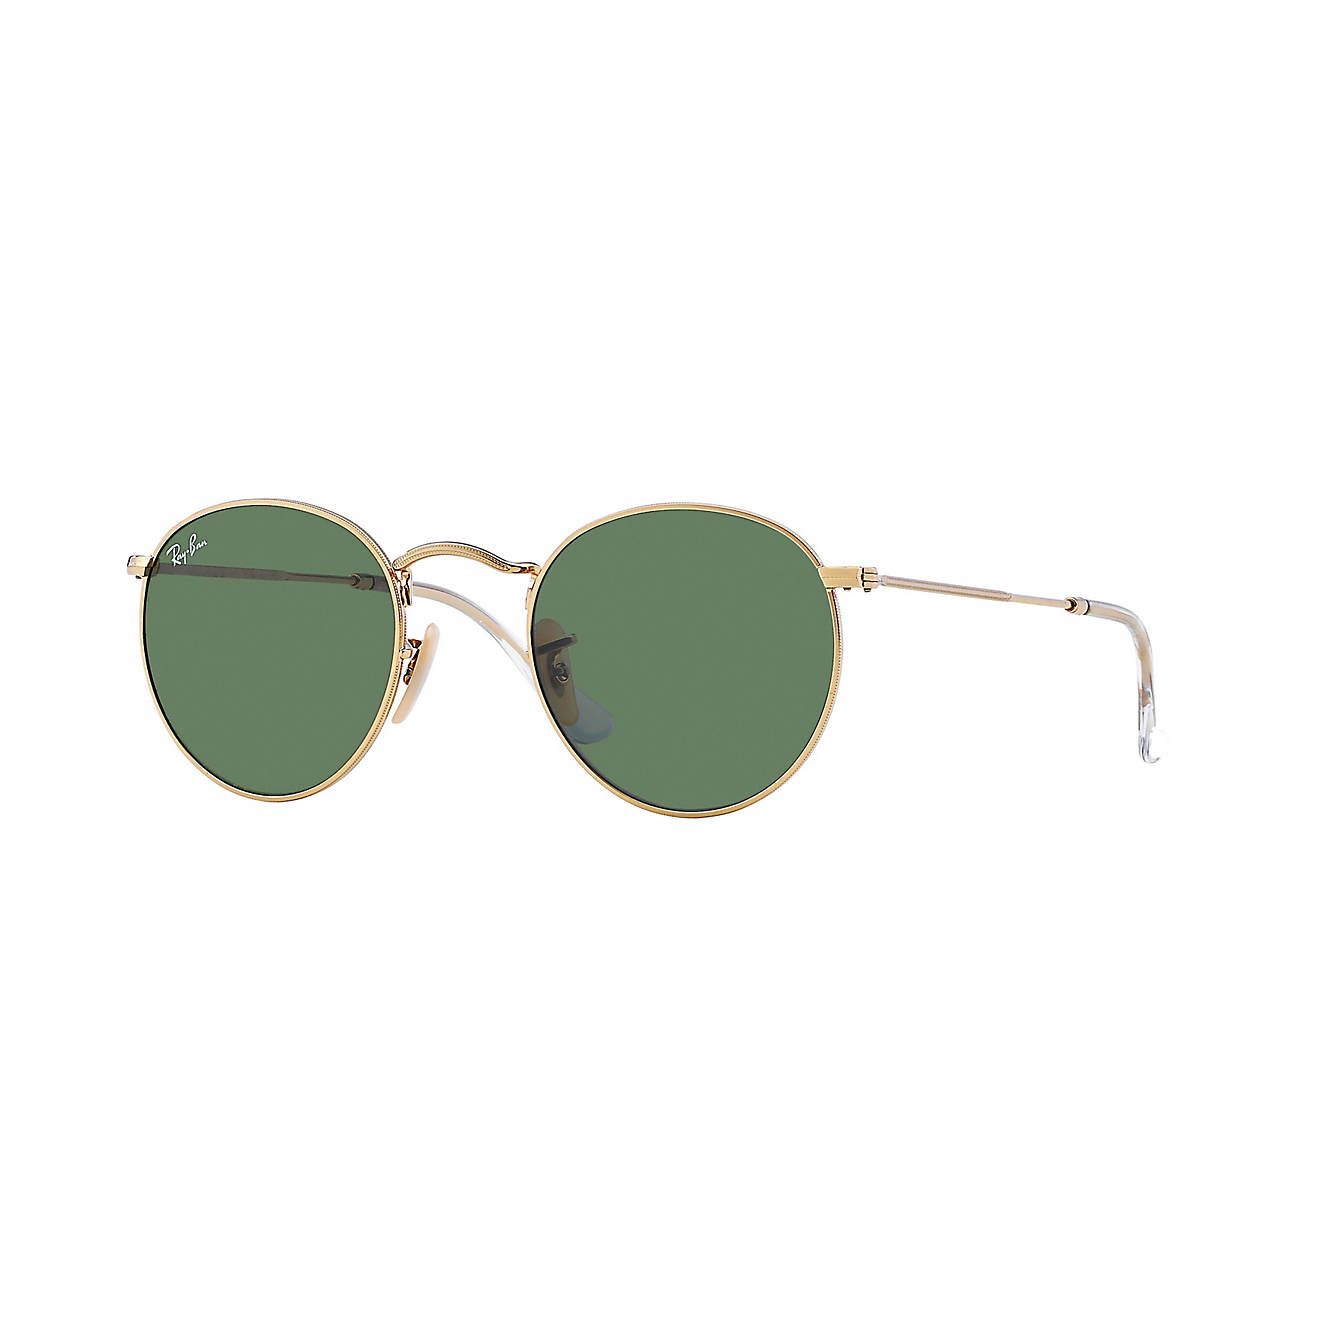 Ray-Ban Round Metal Sunglasses | Academy | Academy Sports + Outdoors